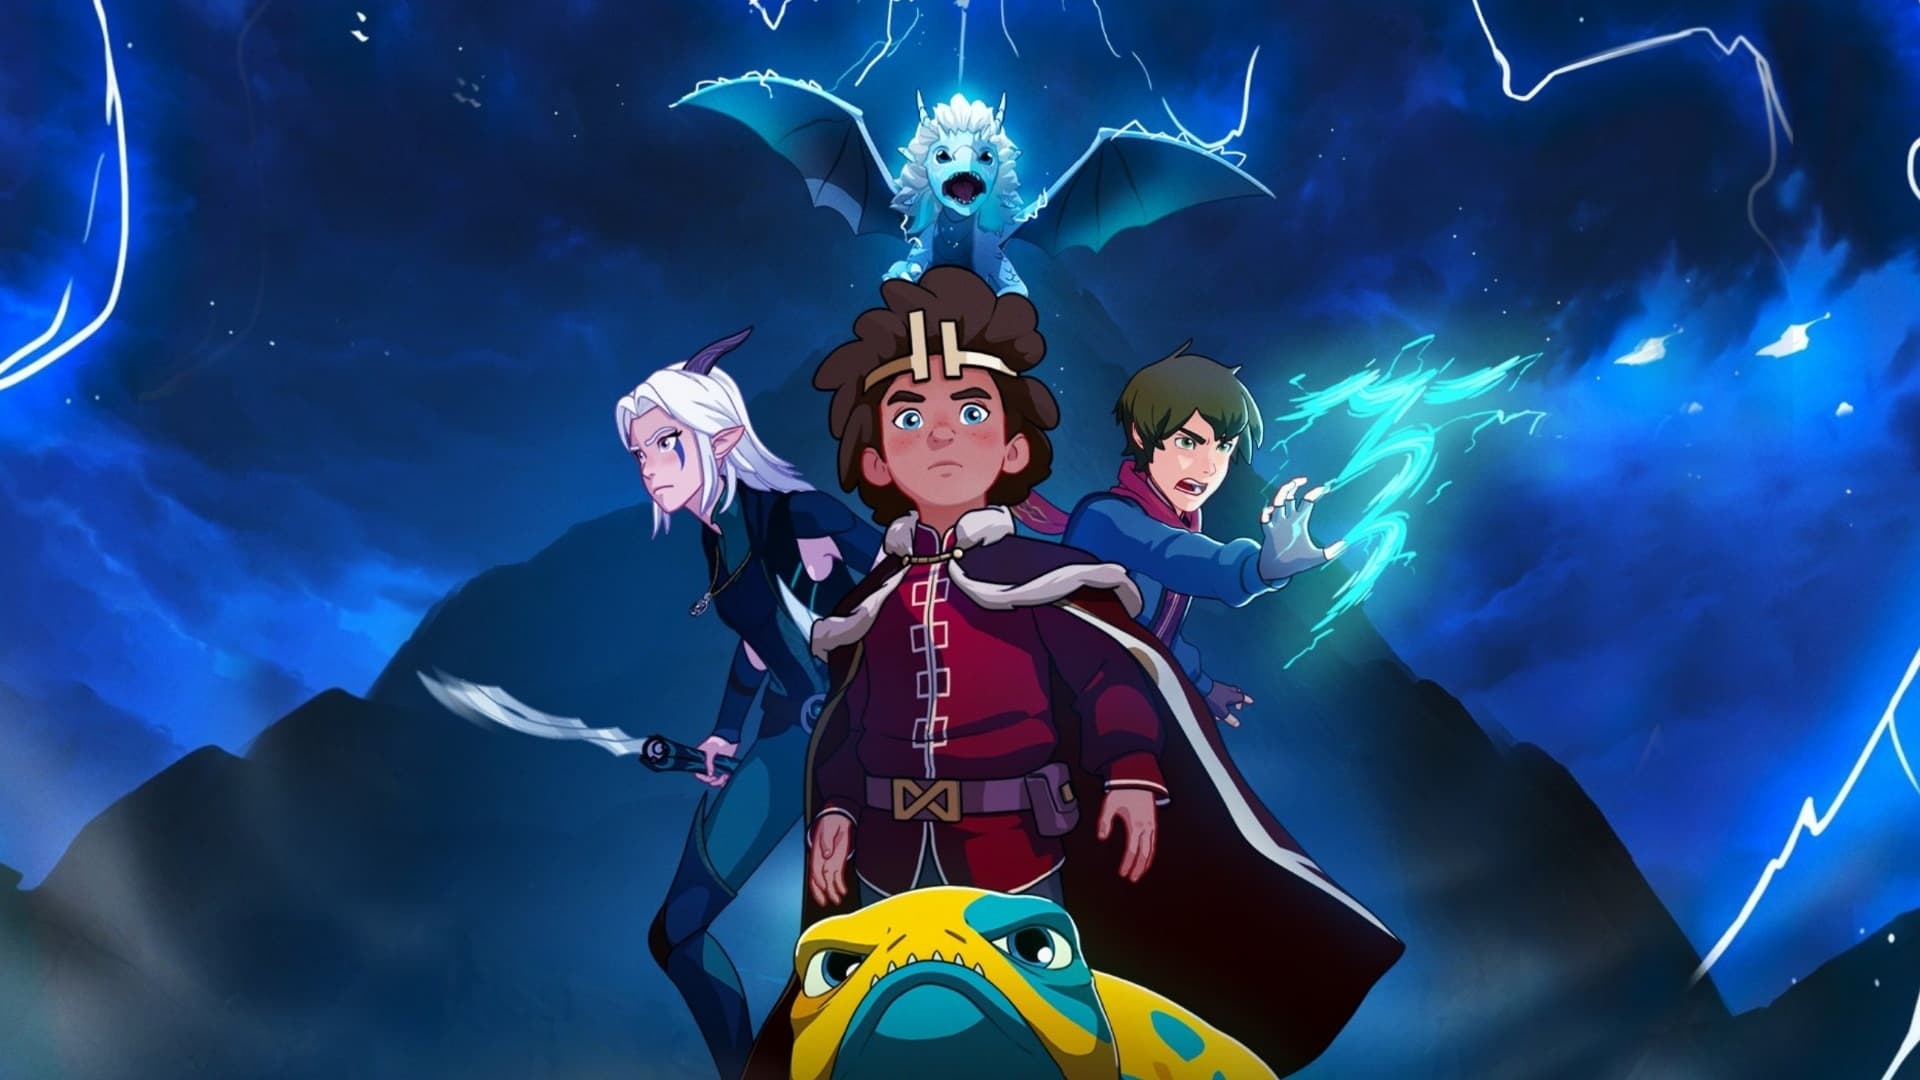 20 The Dragon Prince HD Wallpapers and Backgrounds